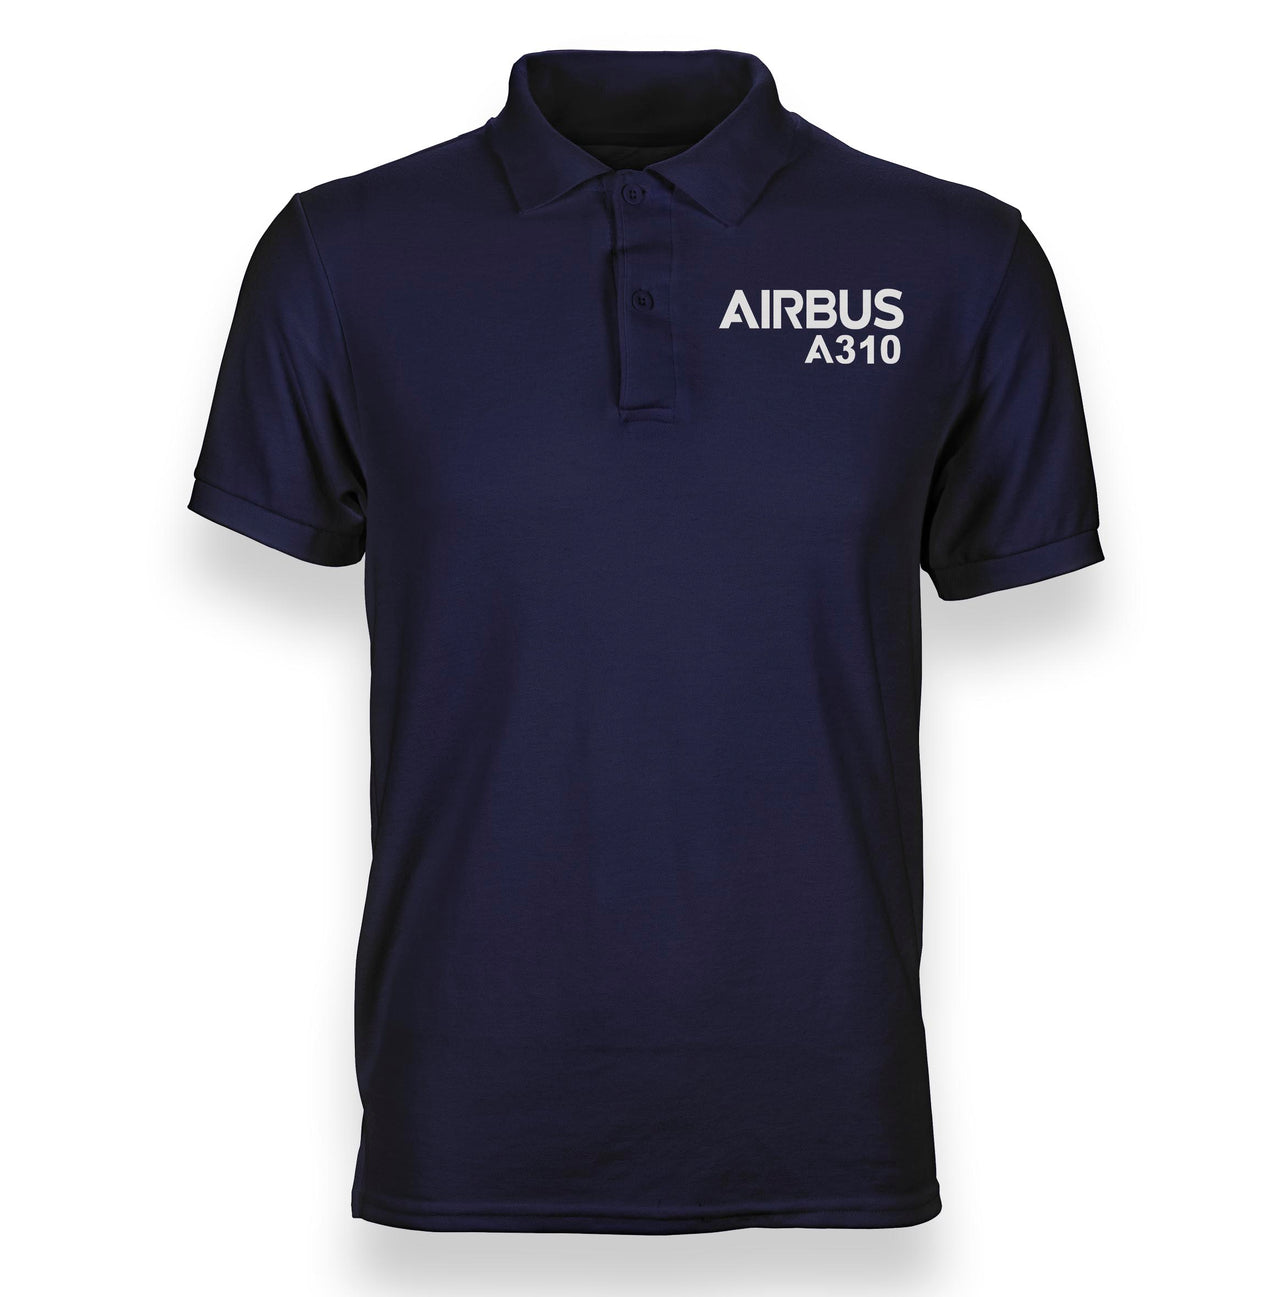 Airbus A310 & Text Designed Polo T-Shirts